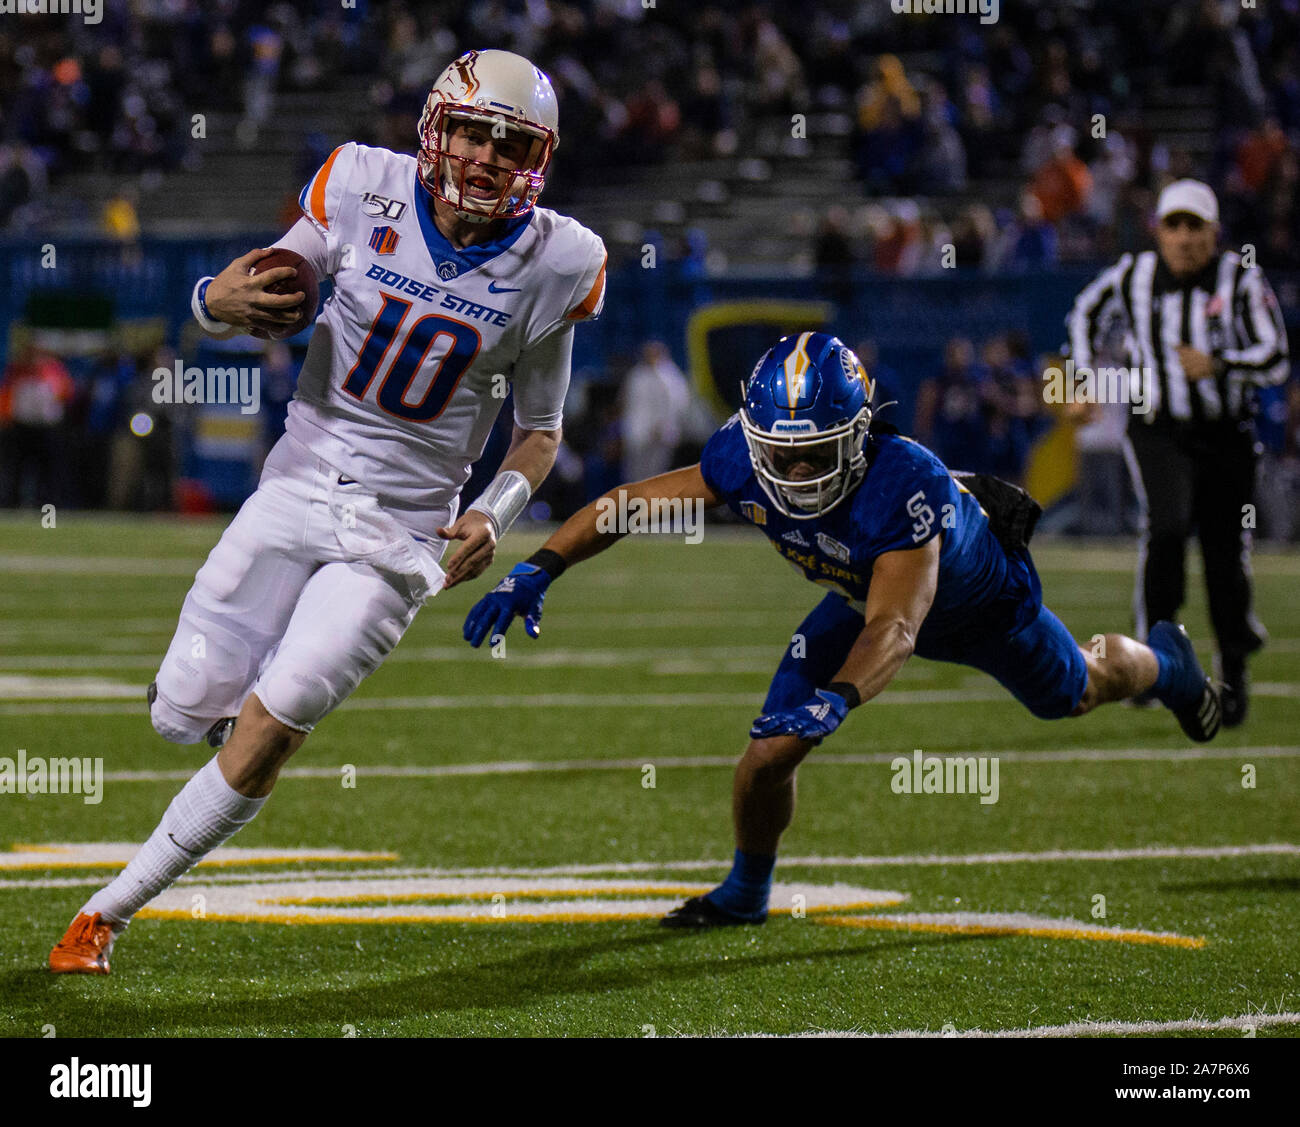 CEFCU Stadium San Jose, CA. 02nd Nov, 2019. San Jose, CA Boise State quarterback Chase Cord (10) runs with the ball and scored a touchdown during the NCAA Football game between Boise State Broncos and the San Jose State Spartans 52-42 win at CEFCU Stadium San Jose, CA. Thurman James/CSM/Alamy Live News Stock Photo